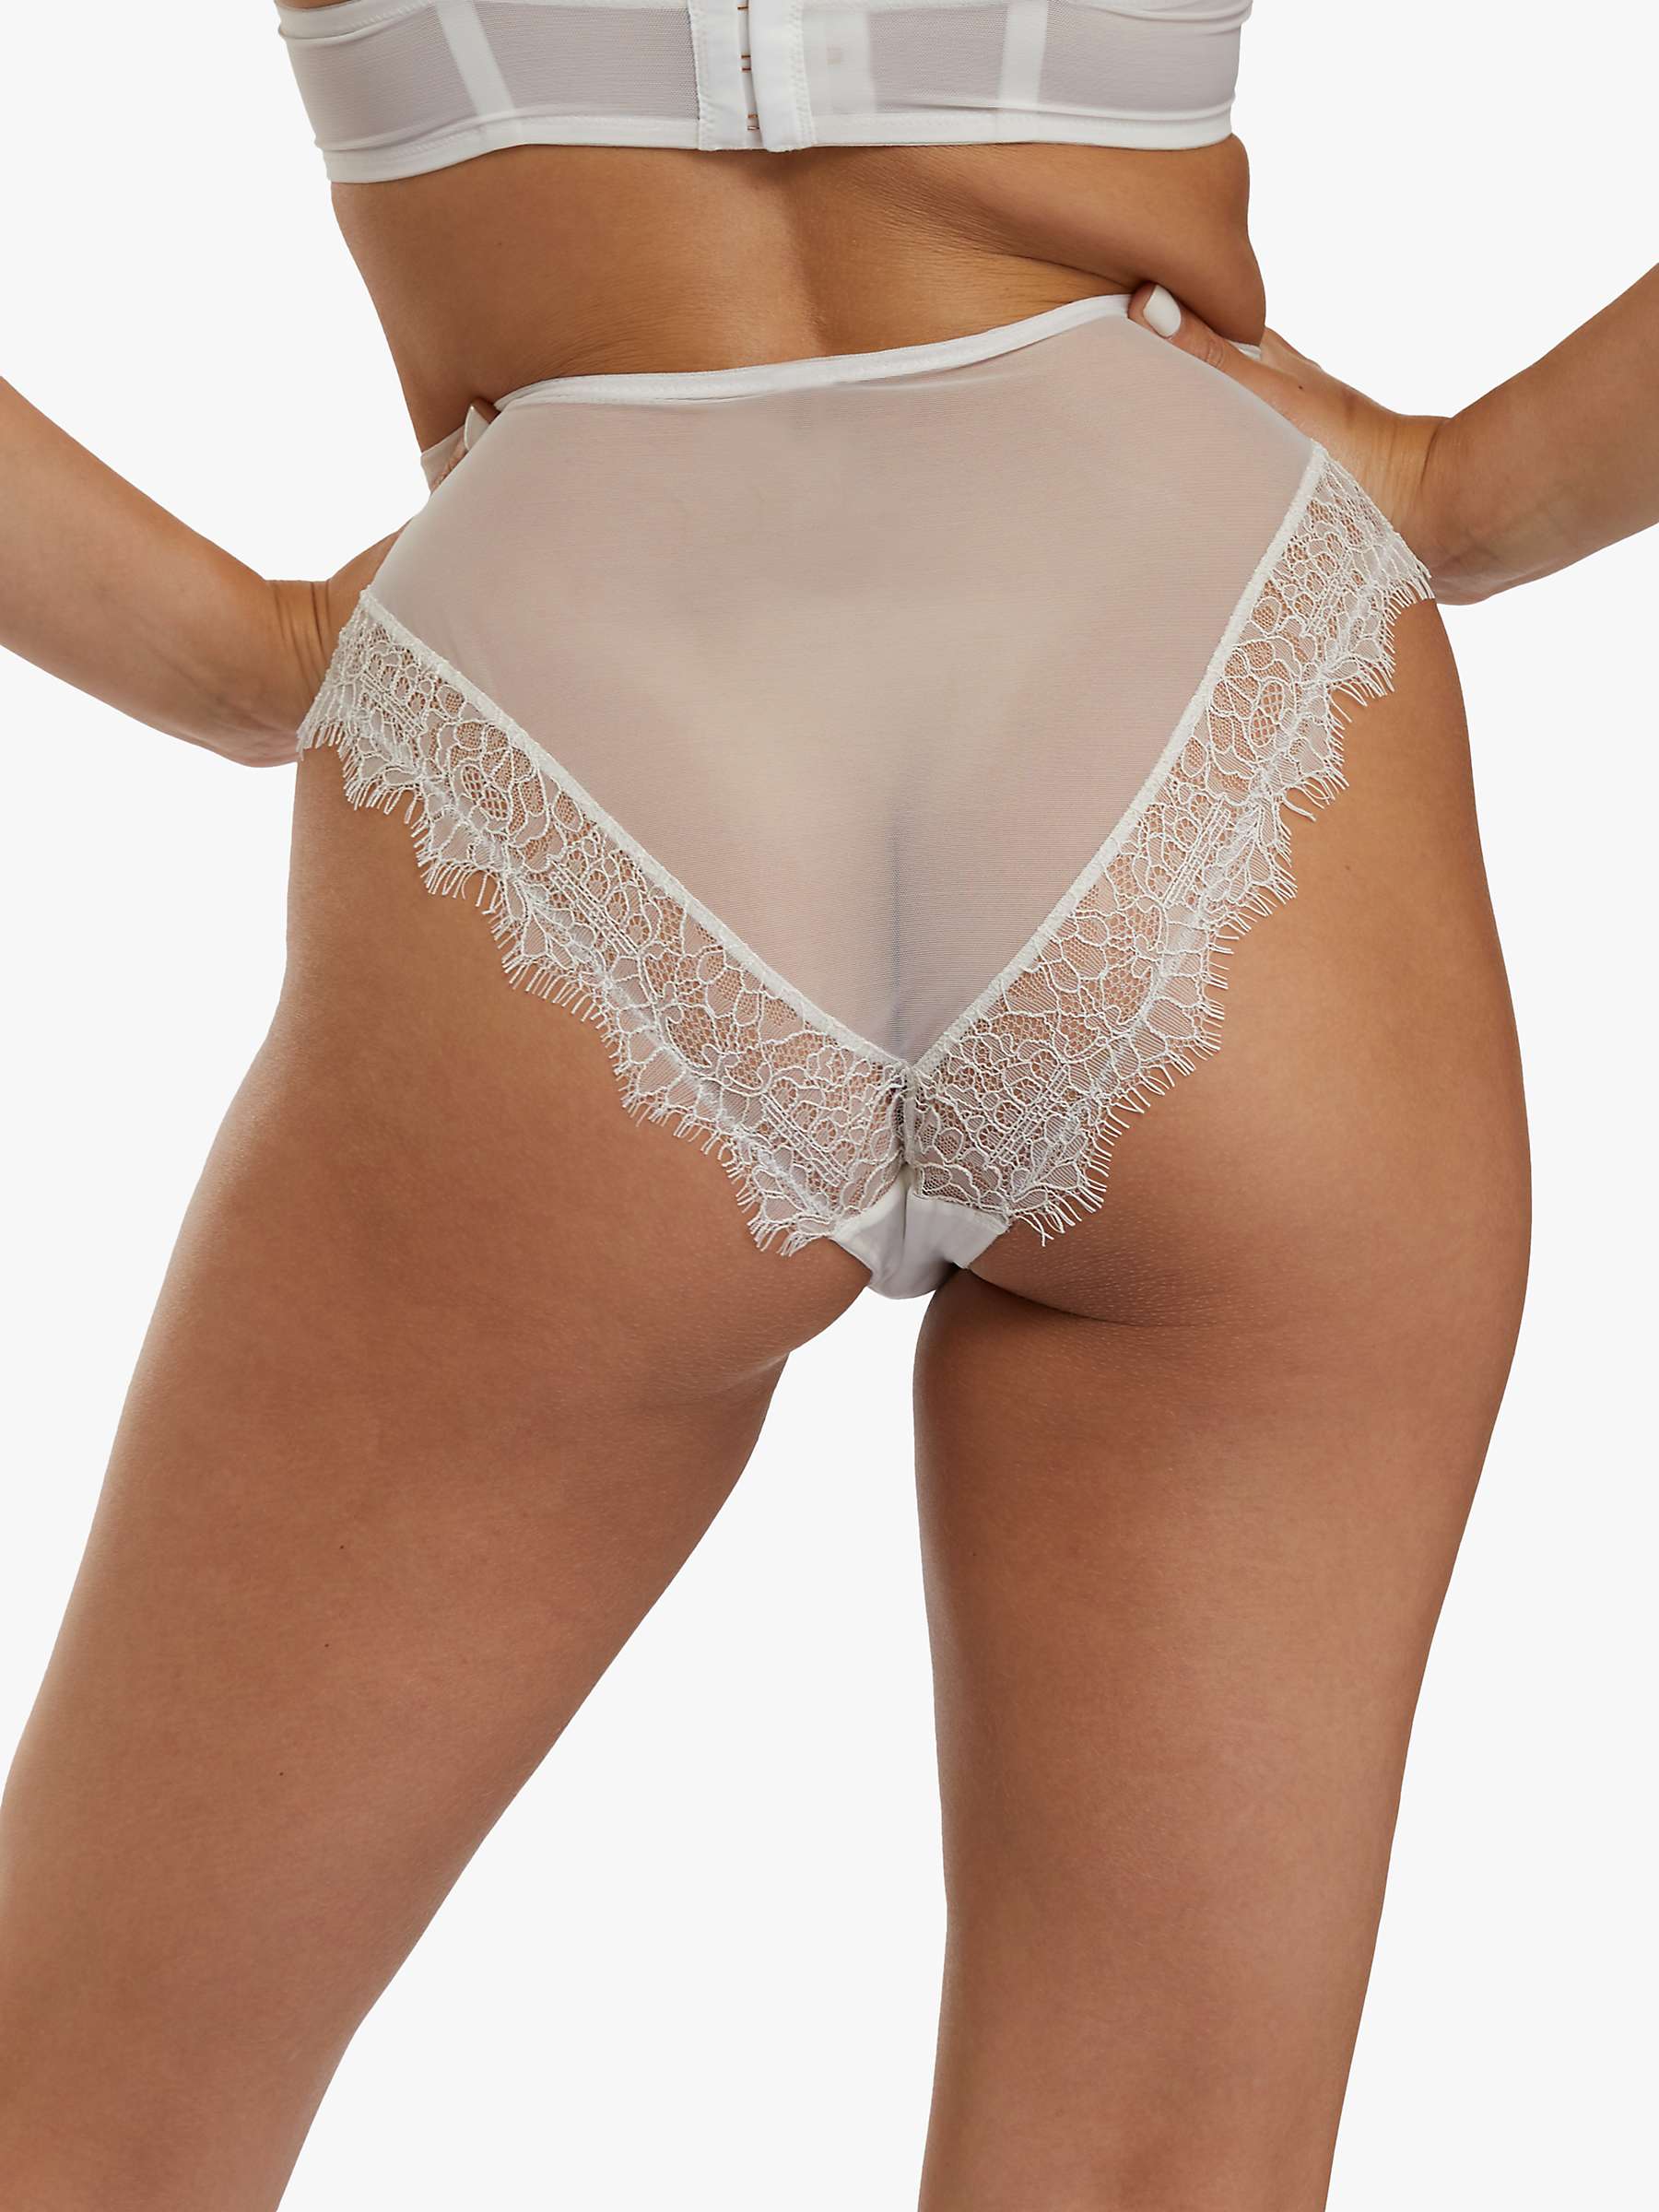 Buy Playful Promises Melina High Waist Knickers,Ivory Online at johnlewis.com